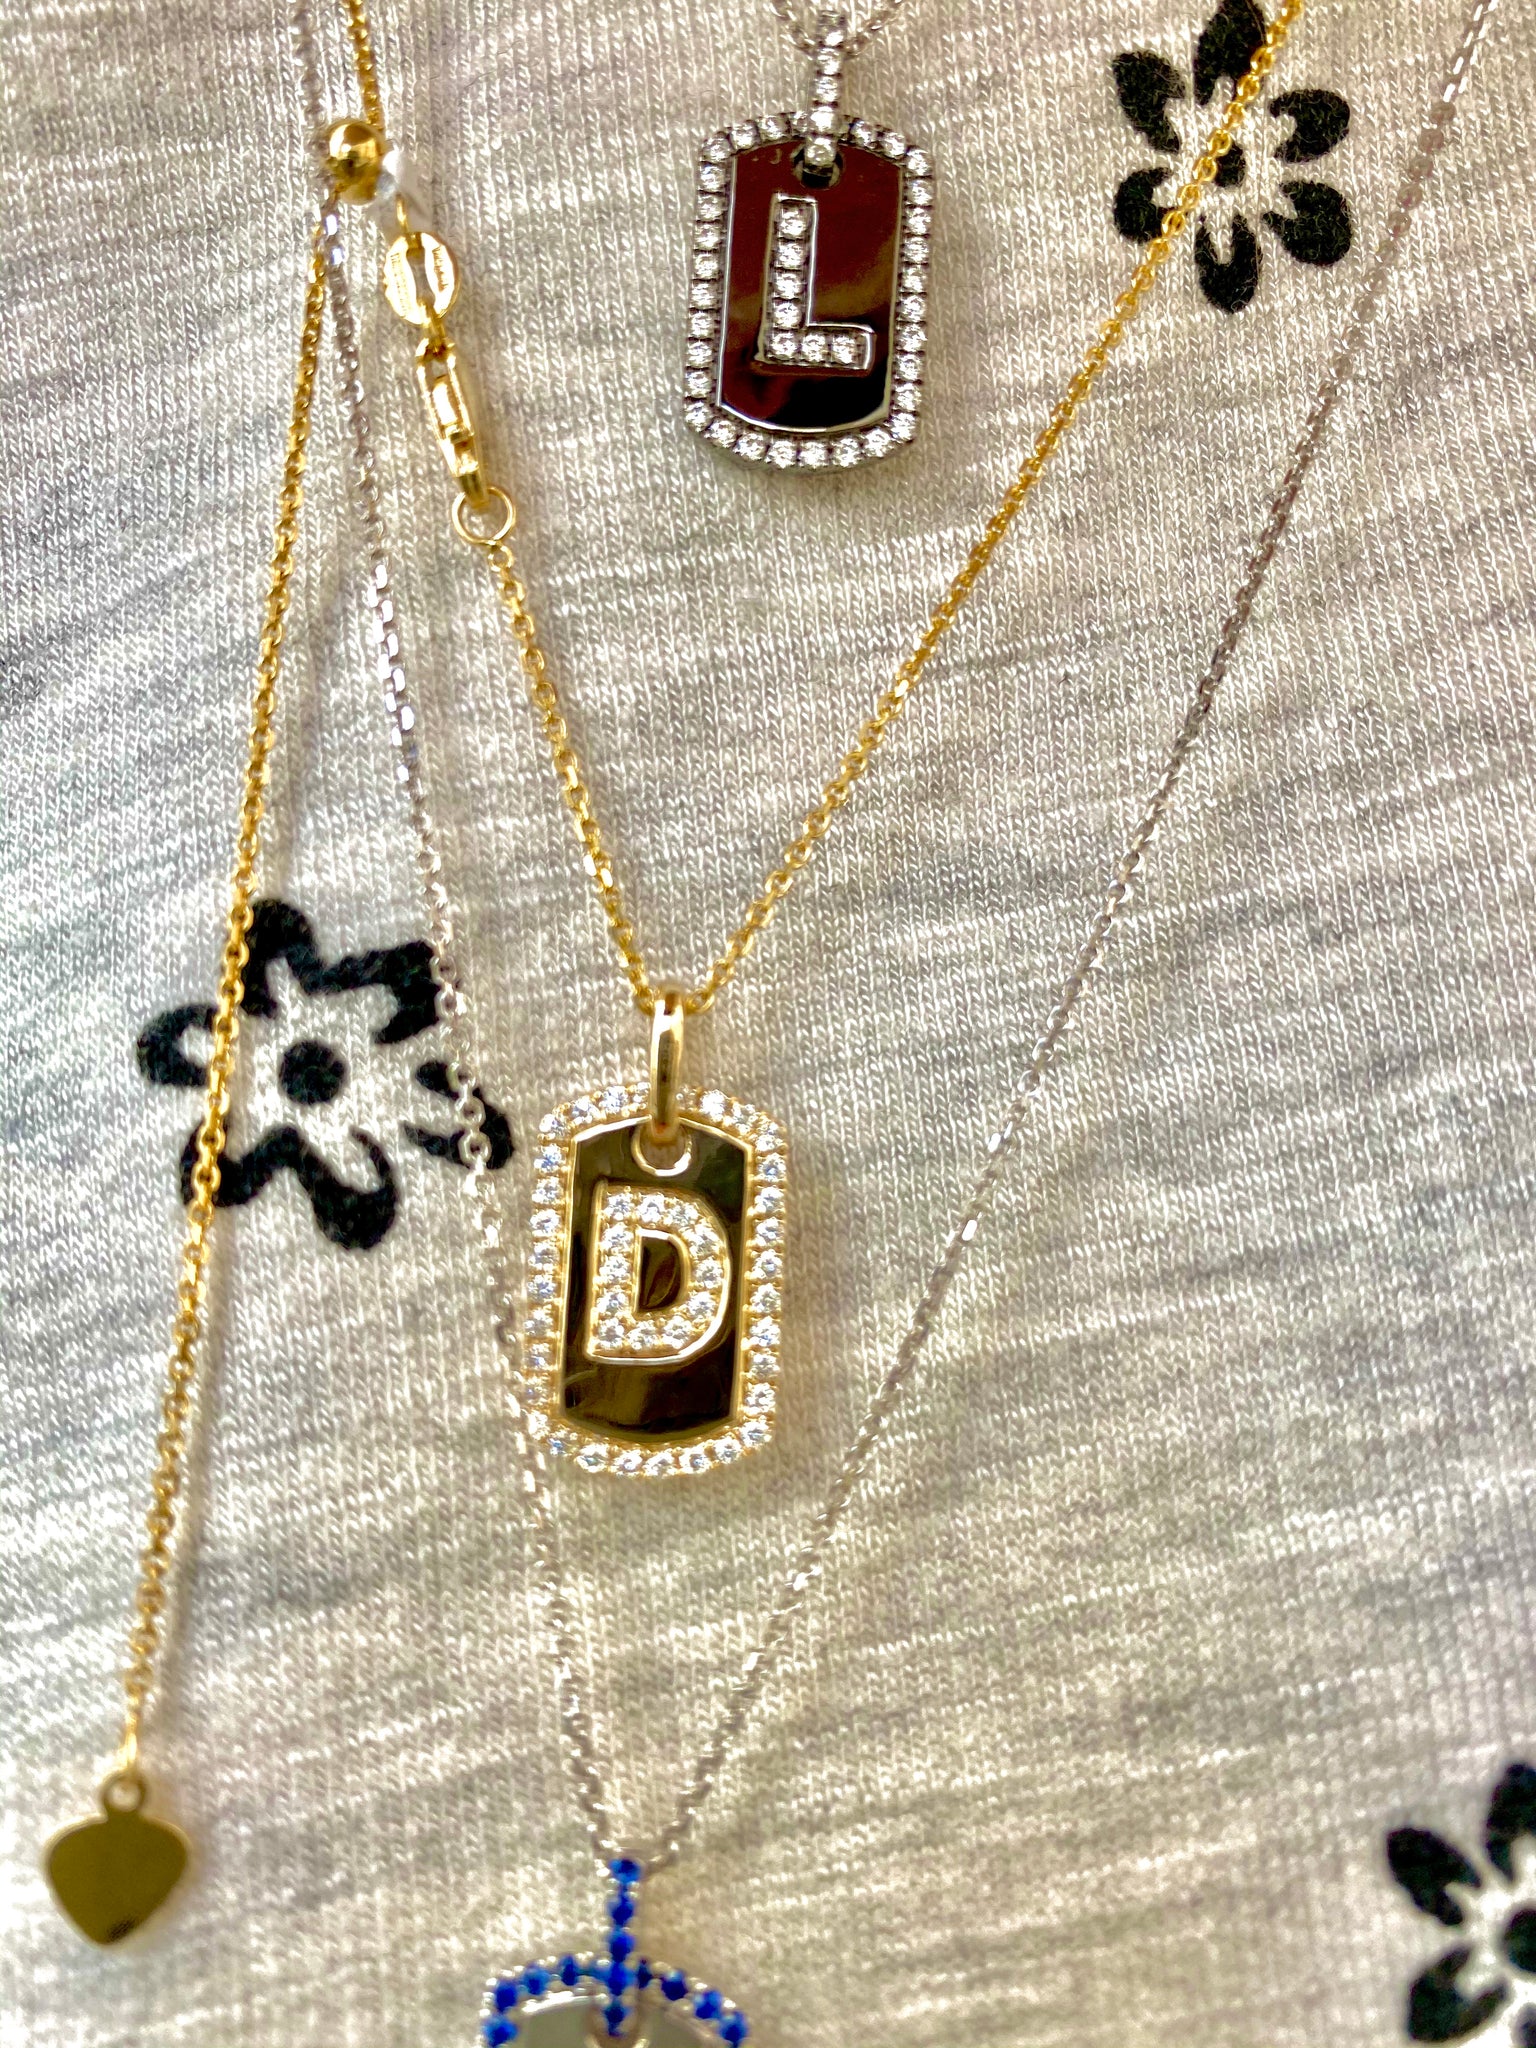 14K Gold Diamond Tag Initial Necklace